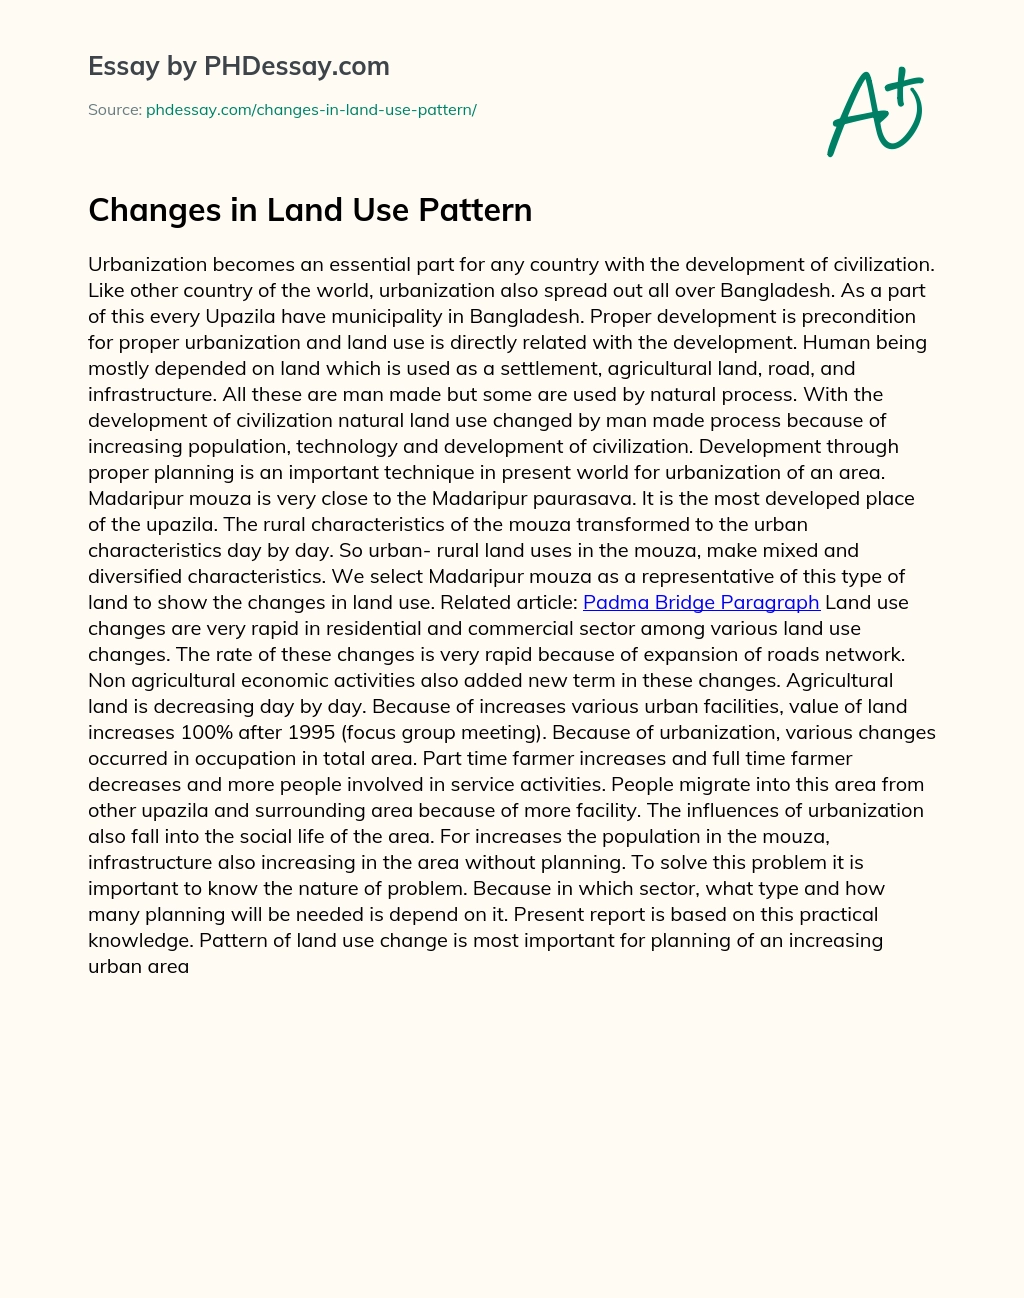 Changes in Land Use Pattern essay